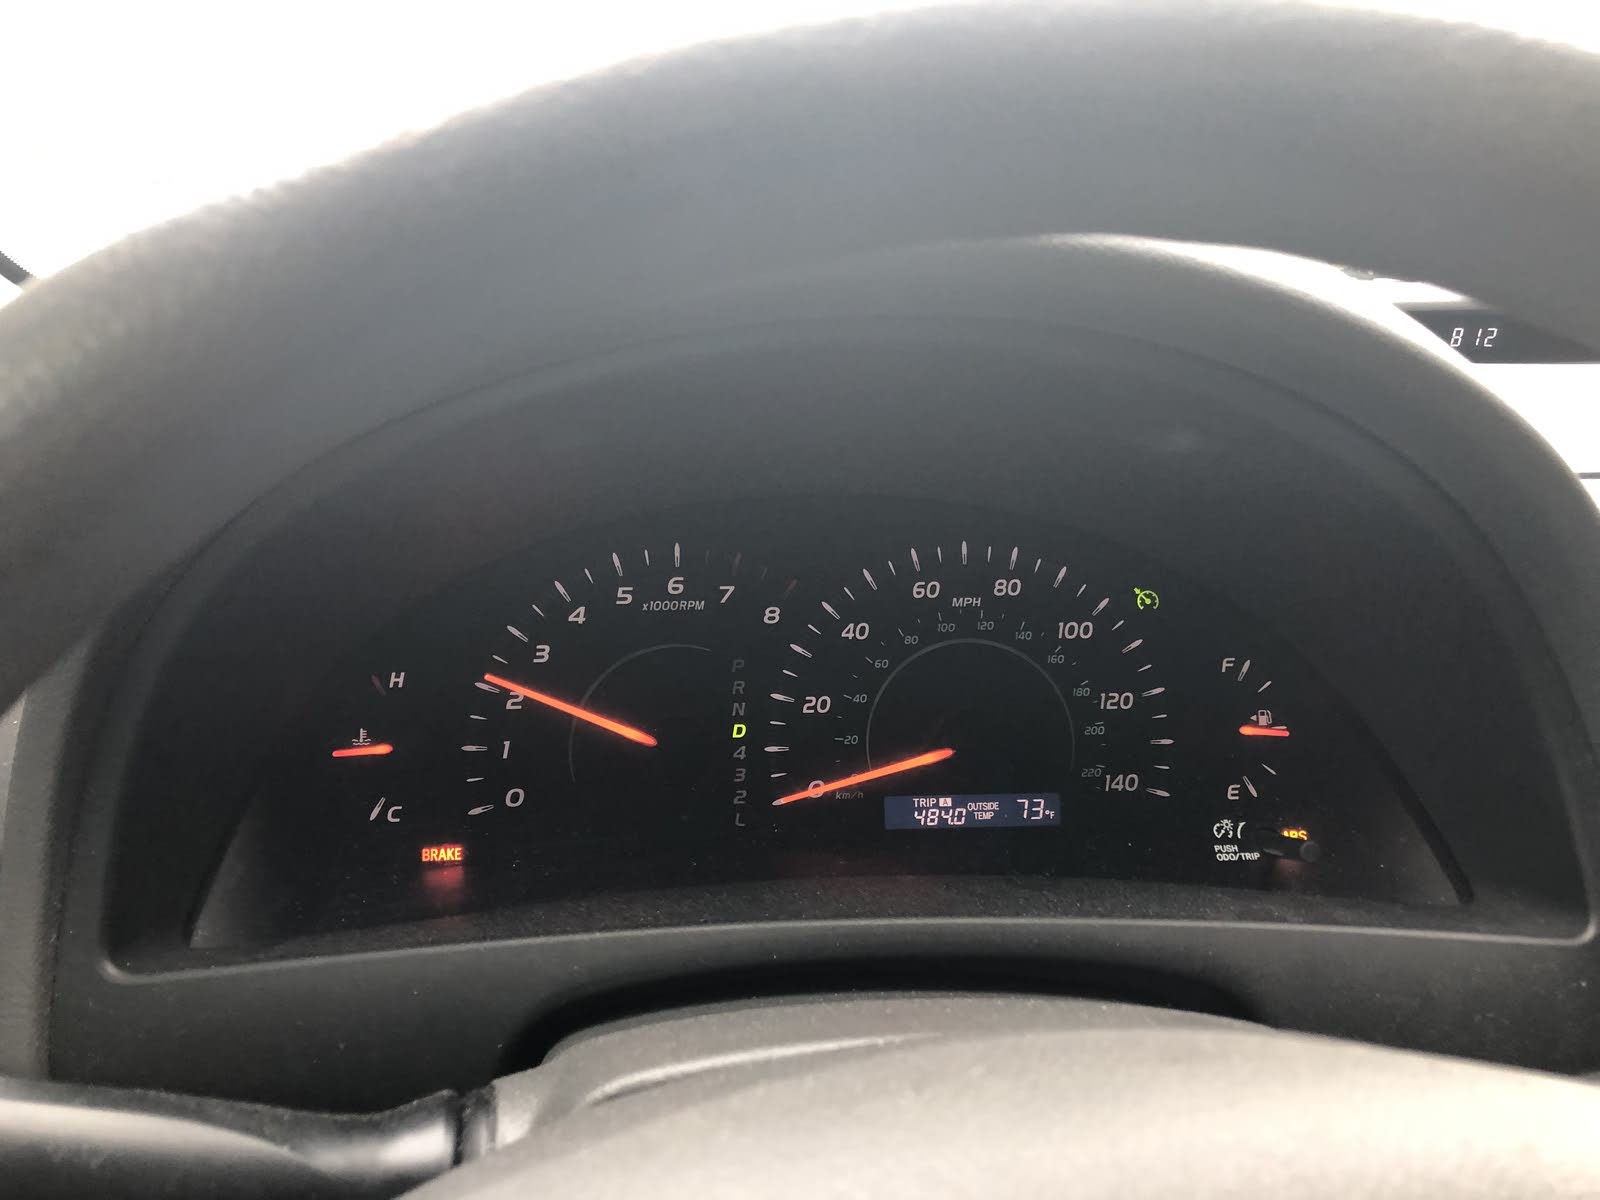 Answered My Absbrake Light Comes On While Driving And Rpm Meter Goes Crazy D L Toyota Camry - Cargurus